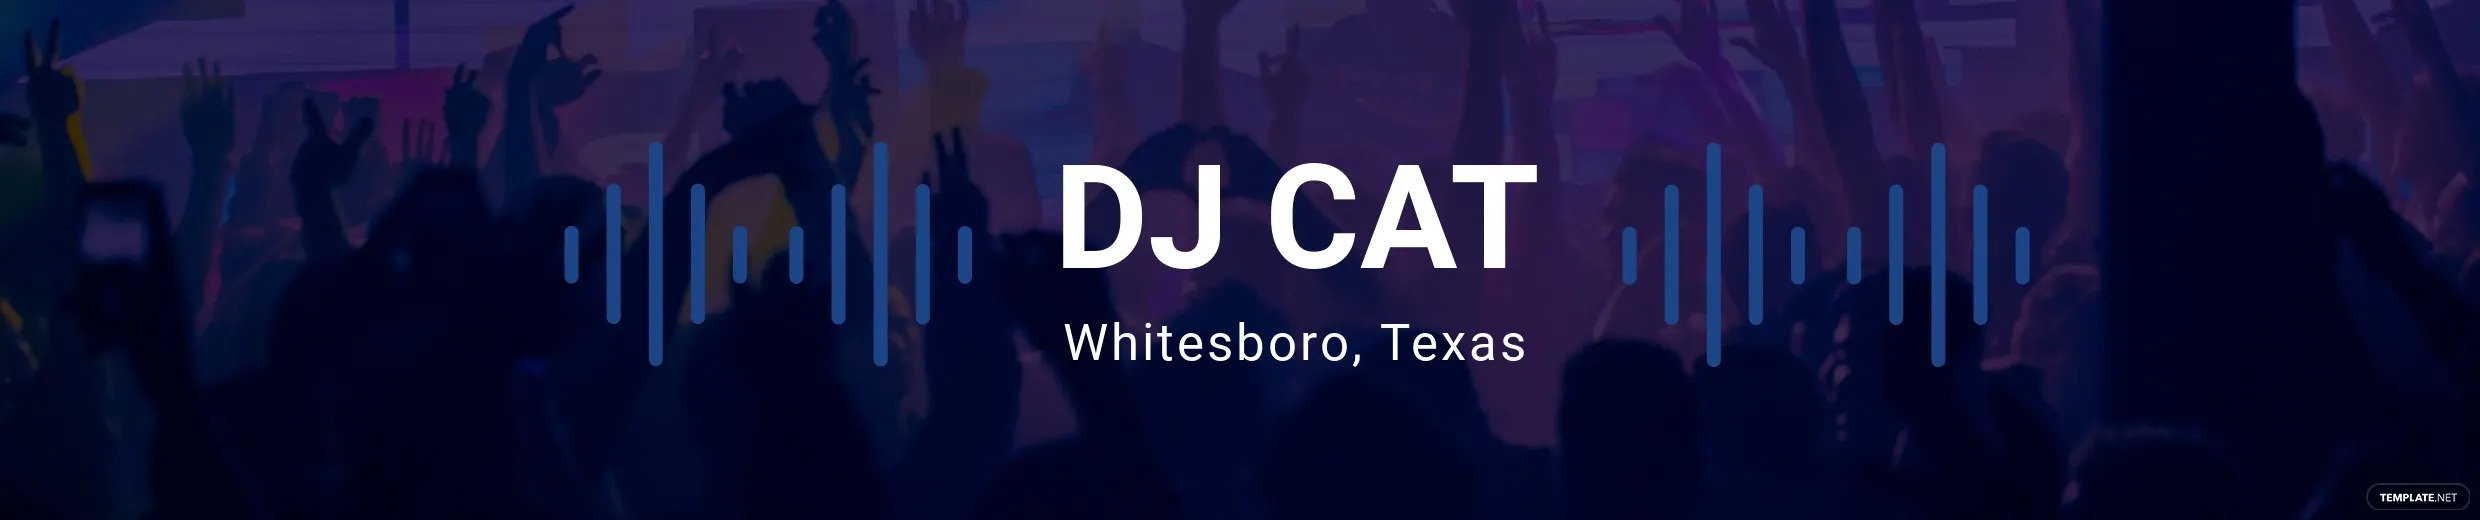 dj soundcloud banner ideas and examples